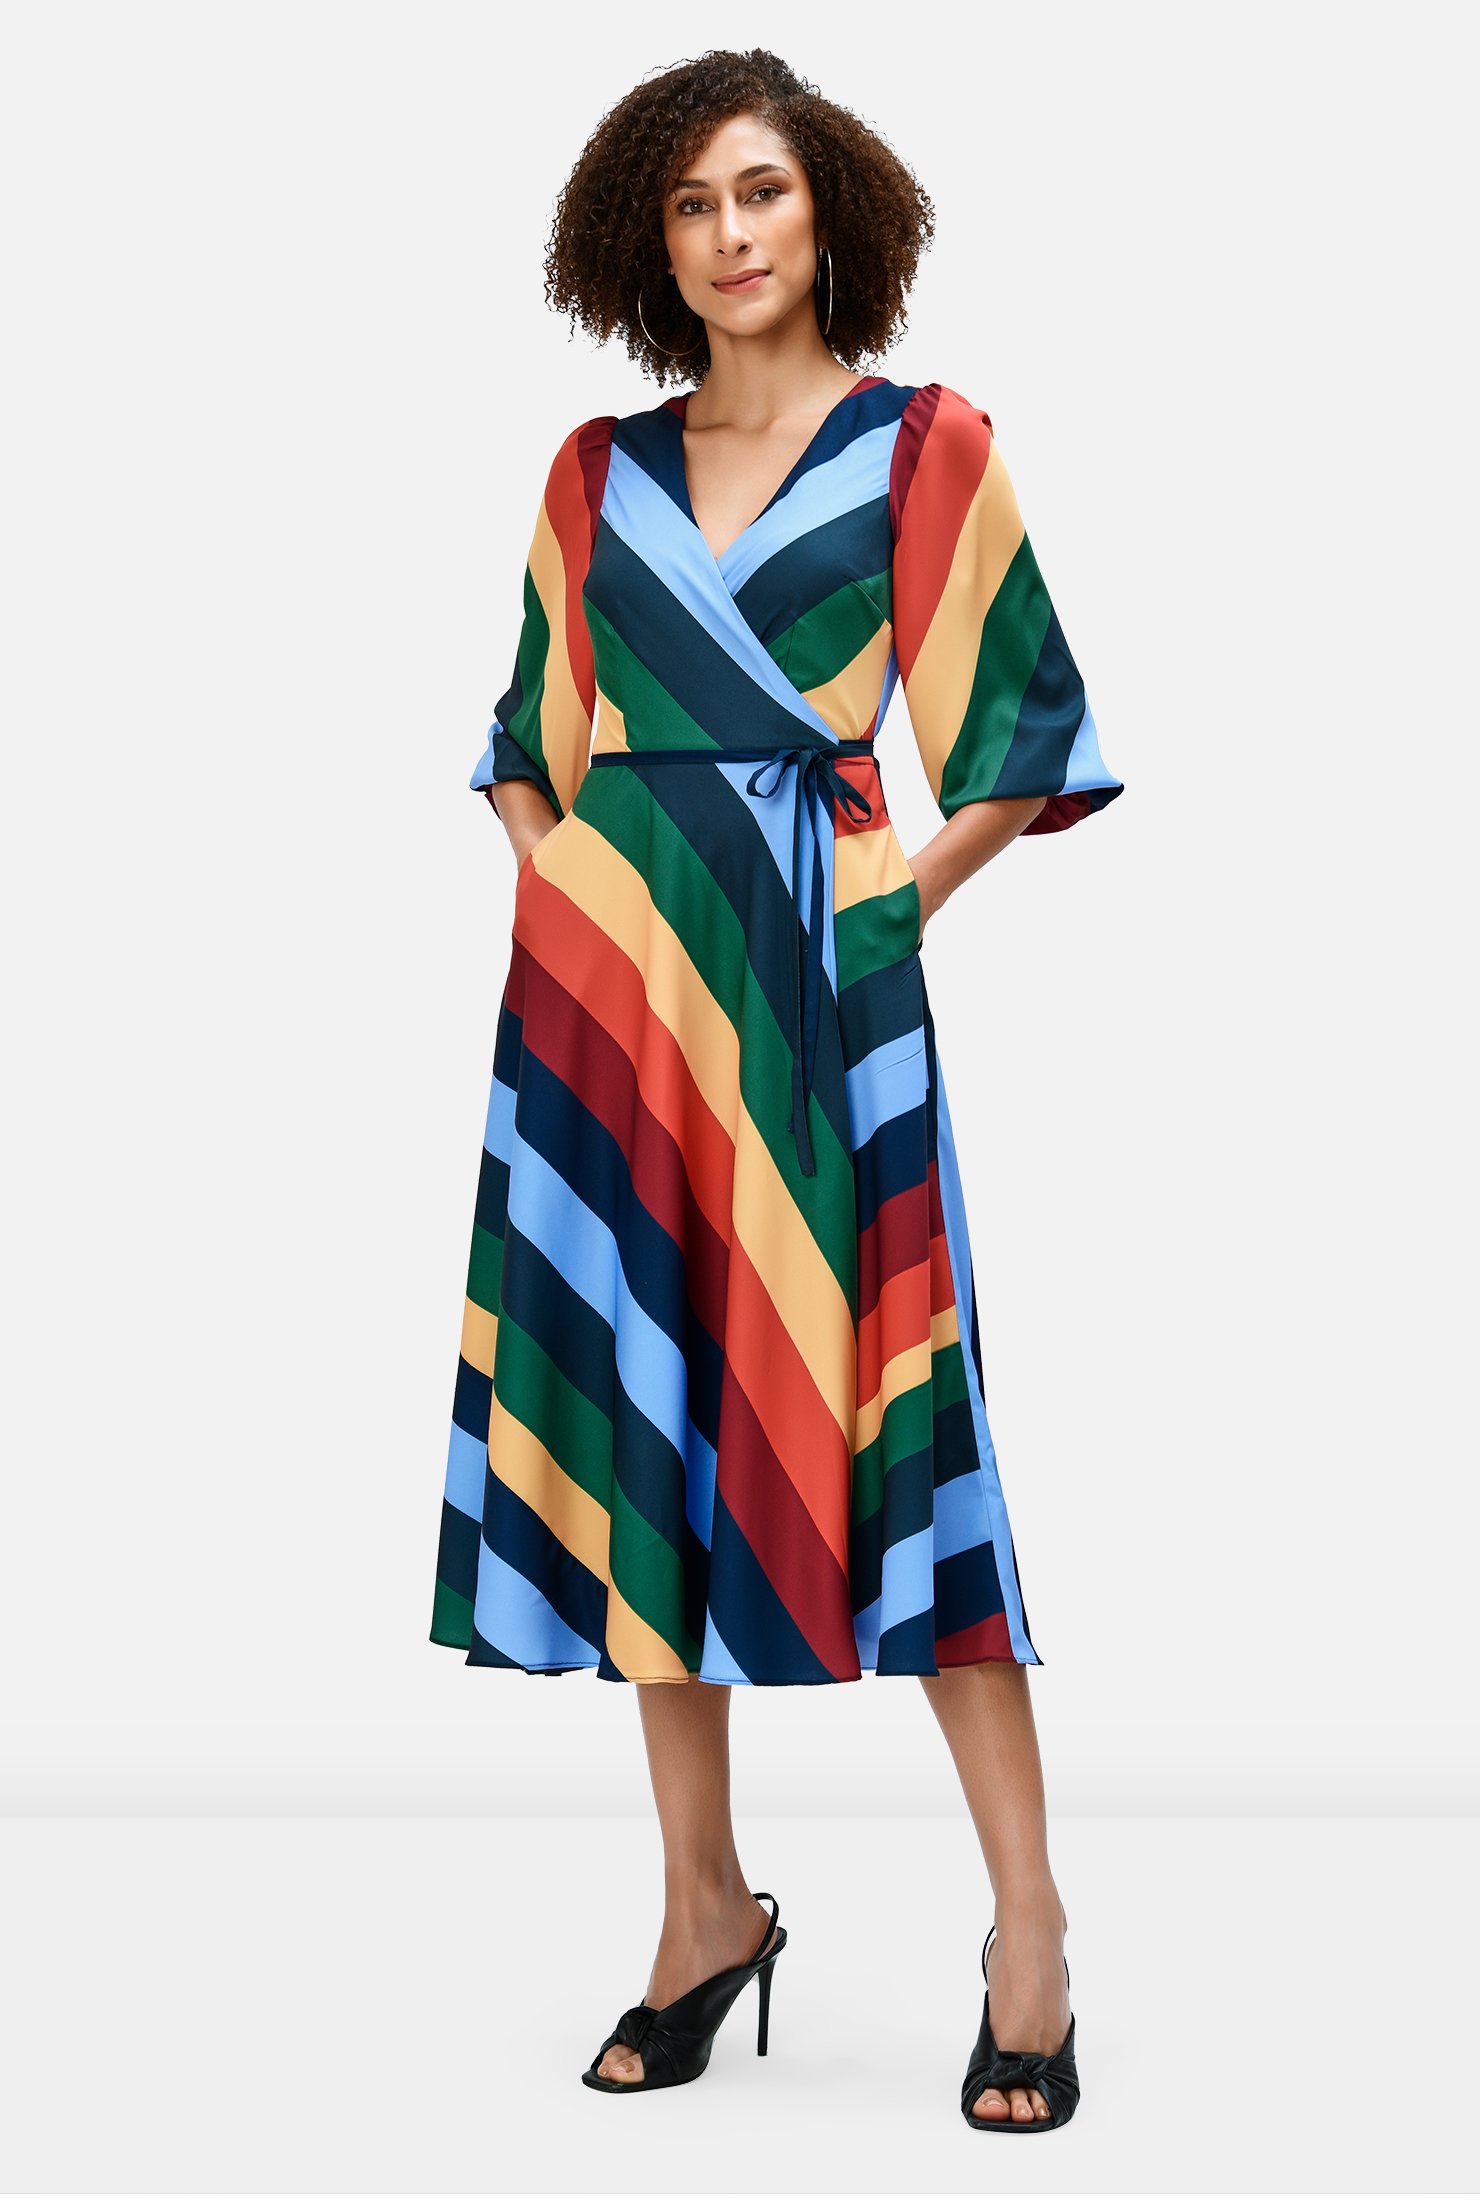 Rainbow bright stripes pattern our bias-cut crepe wrap dress cinched in at the seamed waist with attached half-ties.